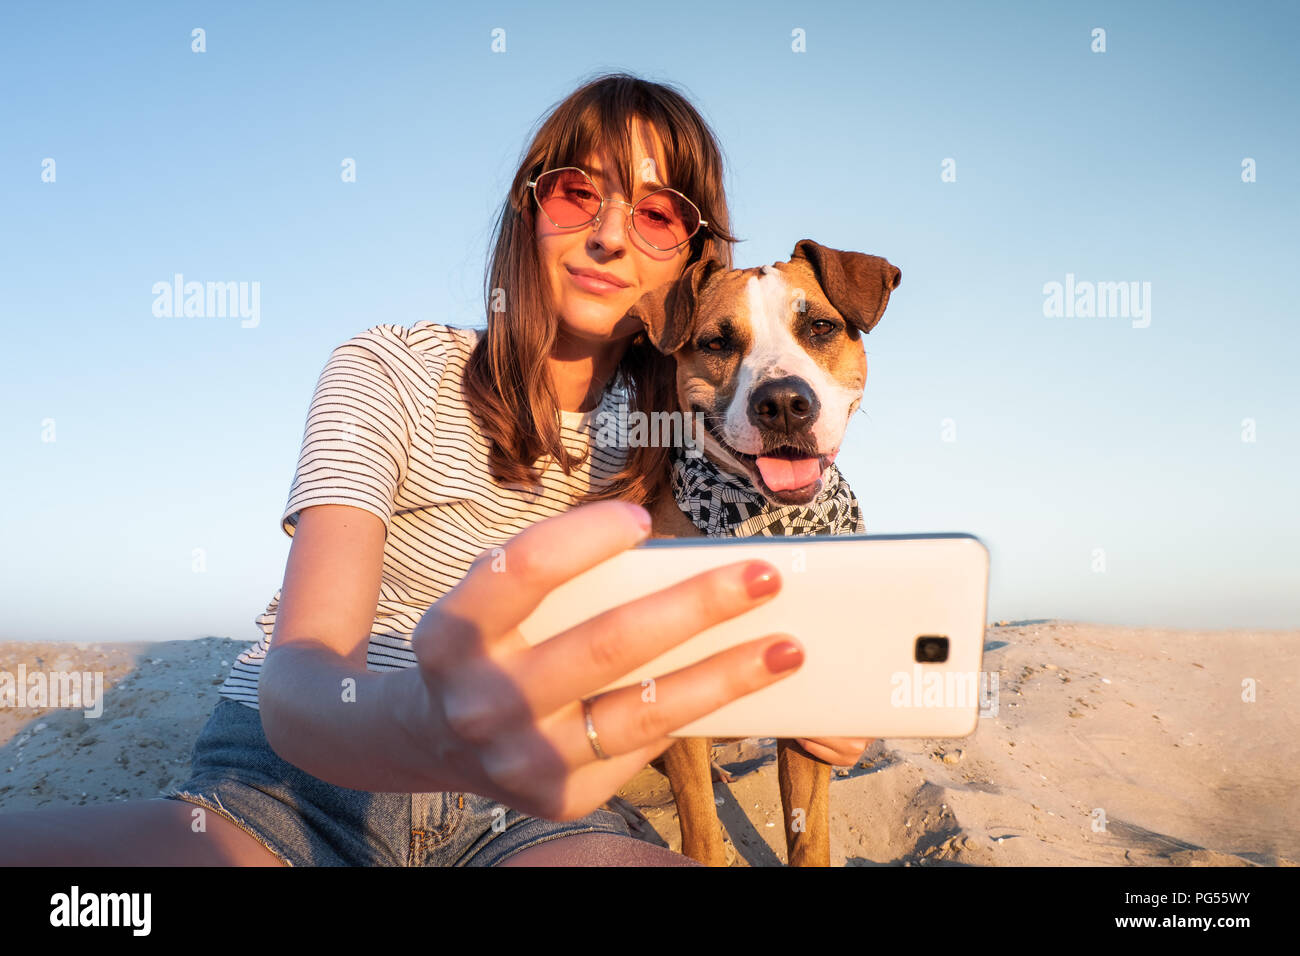 Best friends concept: human taking a selfie with dog. Young female makes self portrait with her puppy outdoors on a beach Stock Photo